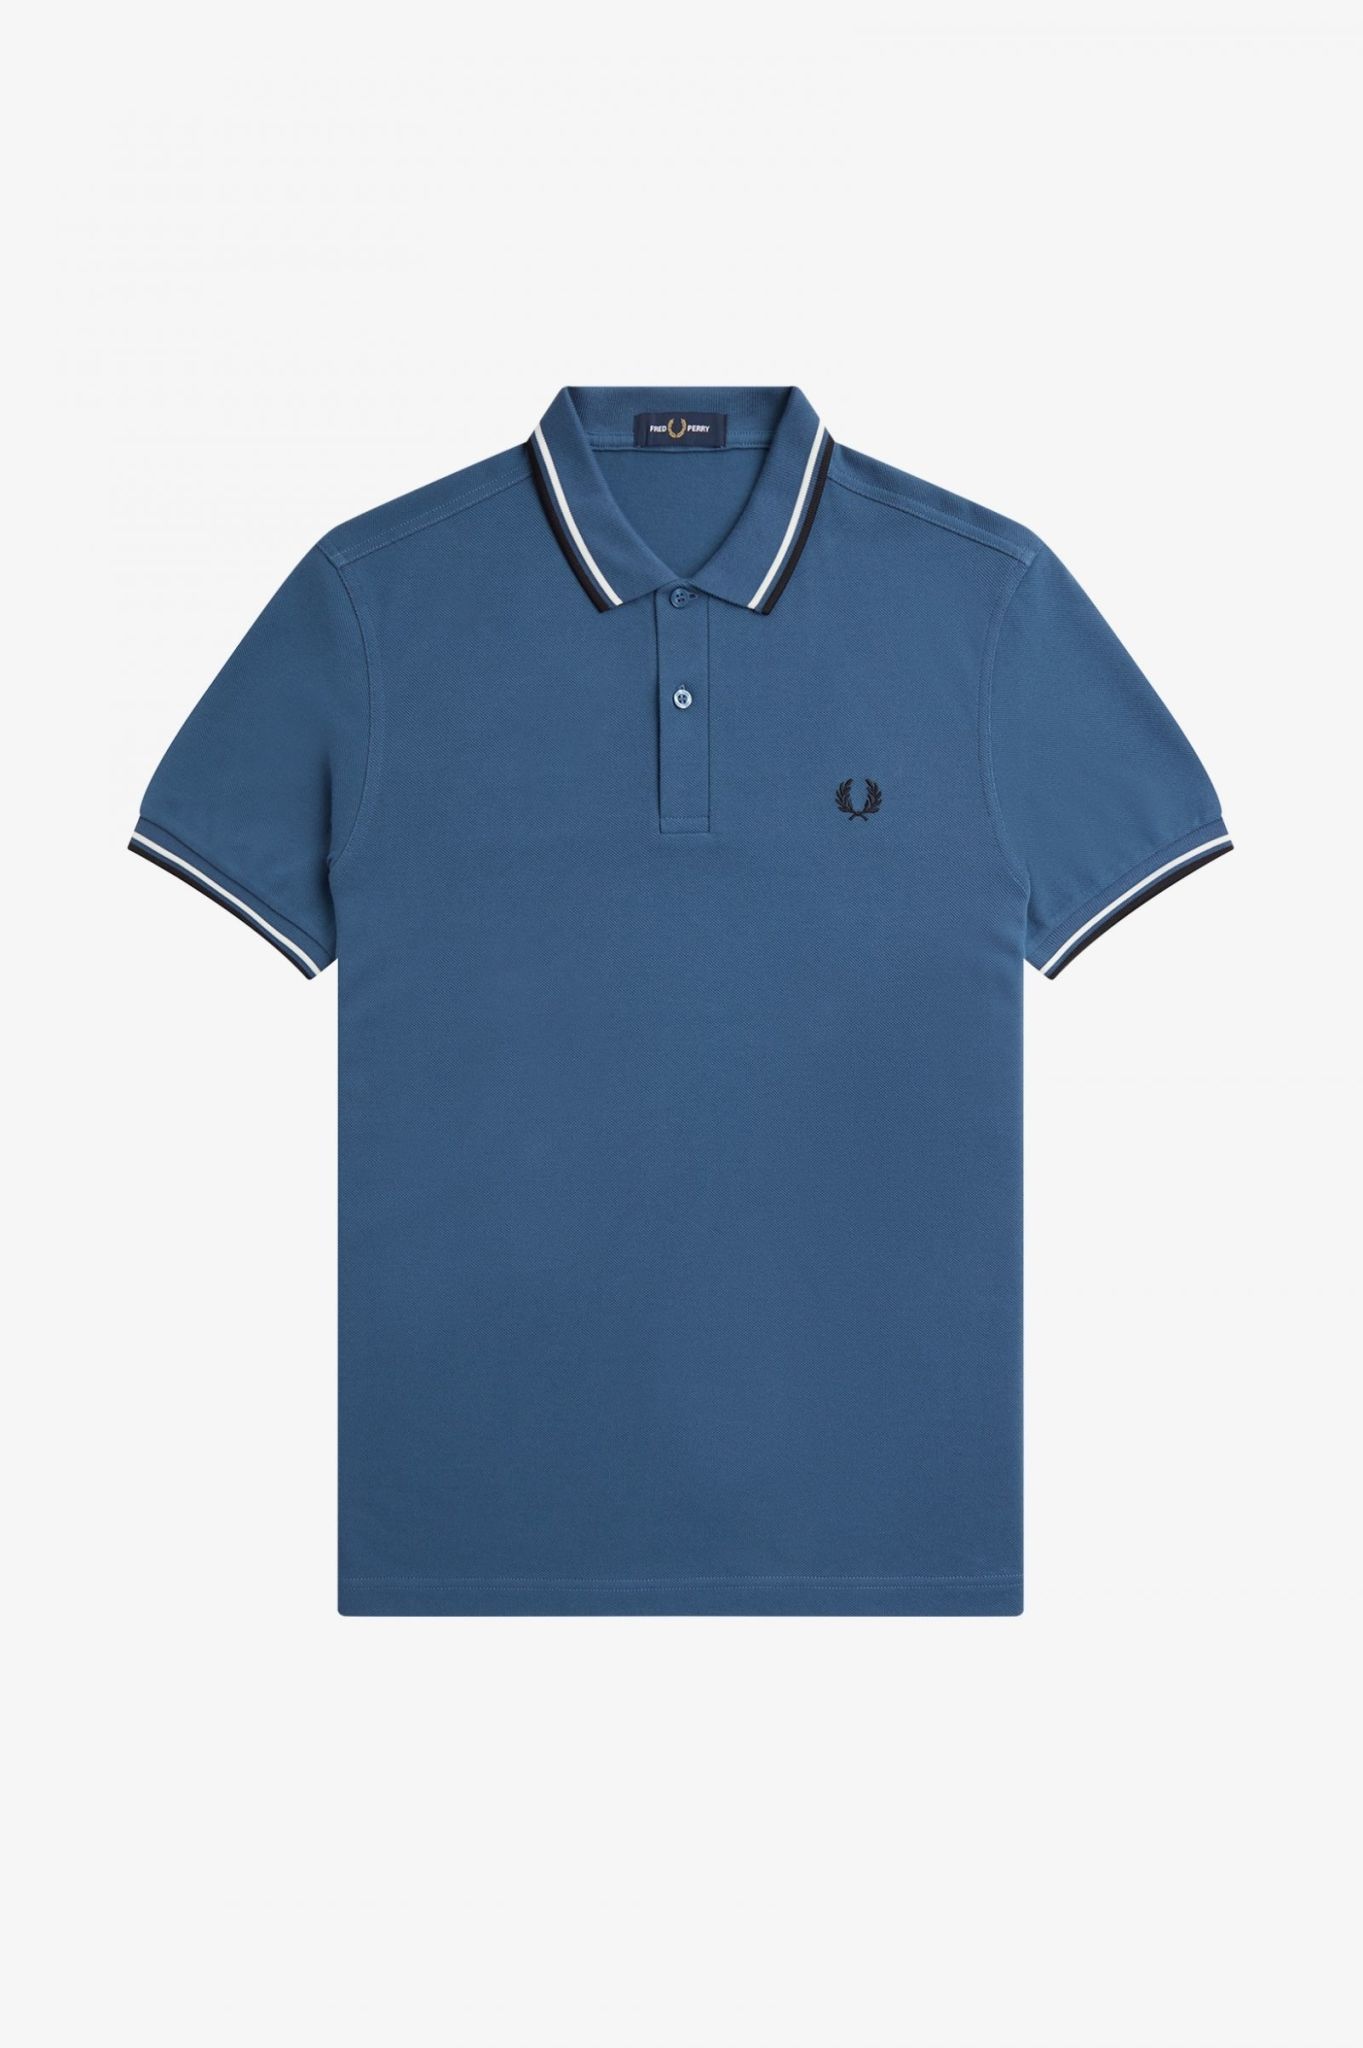 Twin Tipped Fred Perry Shirt in Midnight Blue/White - Eastwood Ave